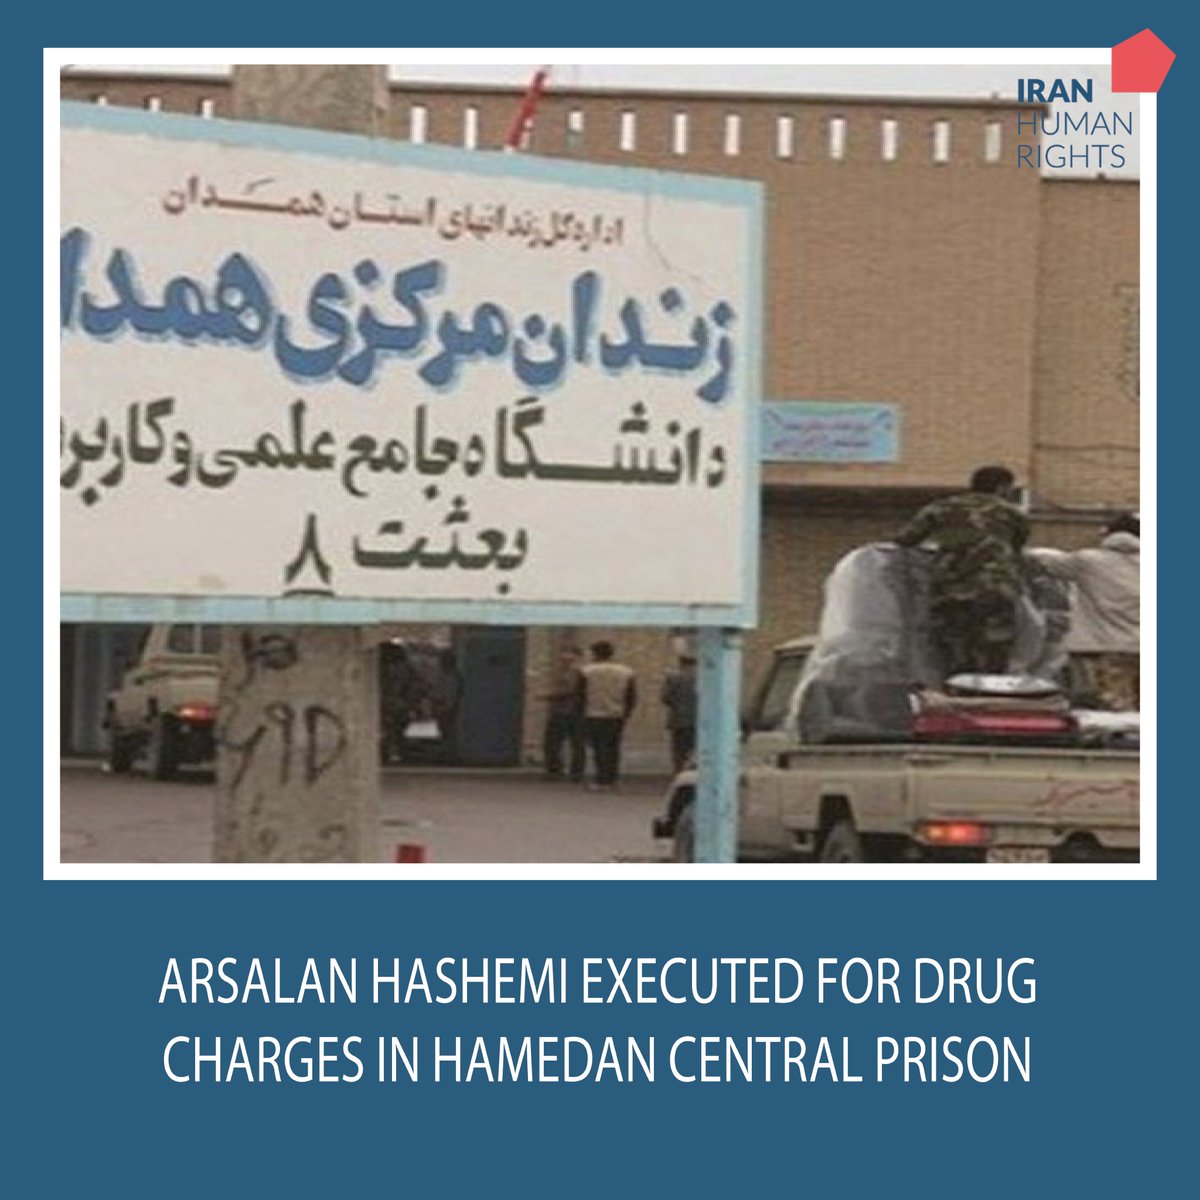 #Iran: Arsalan Hashemi, a 31-year-old man on death row for drug-related charges, was executed in Hamedan Central Prison on 14th April. 

#StopDrugExecutions
#StopExecutionsInIran
iranhr.net/en/articles/66…